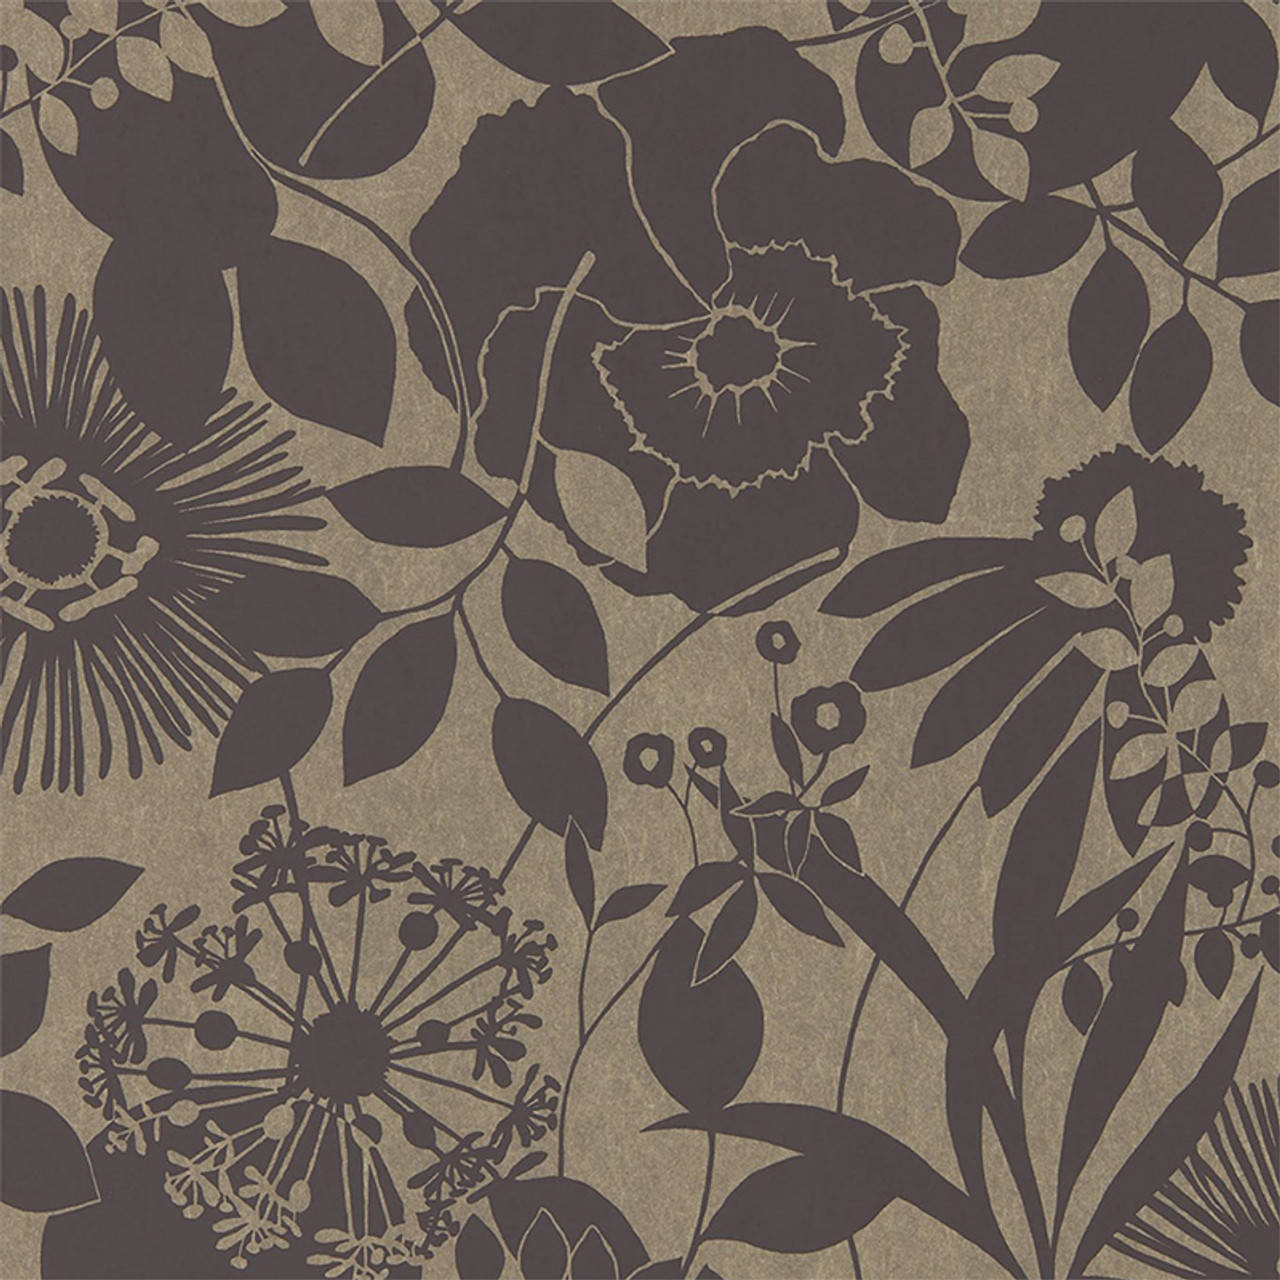 Coquette Brown Flowers Silhouettes Background